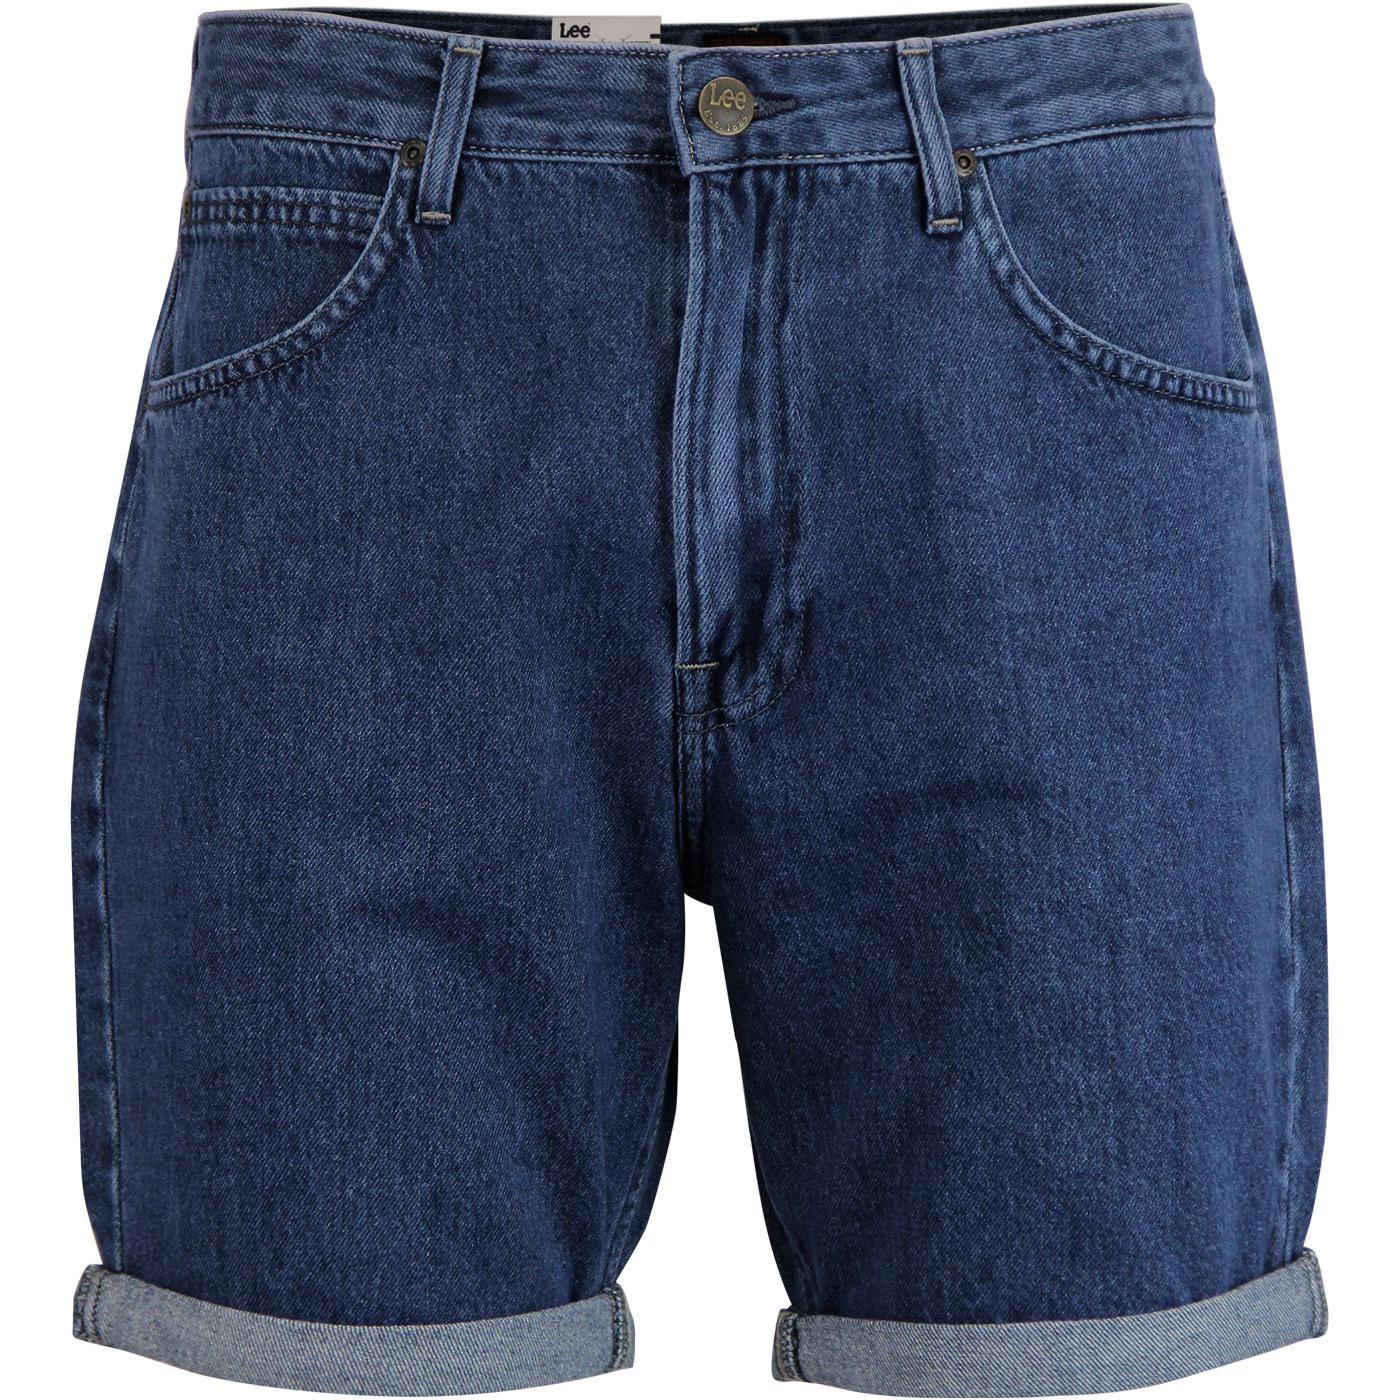 Pipes LEE JEANS Retro Tapered Denim Short TIC